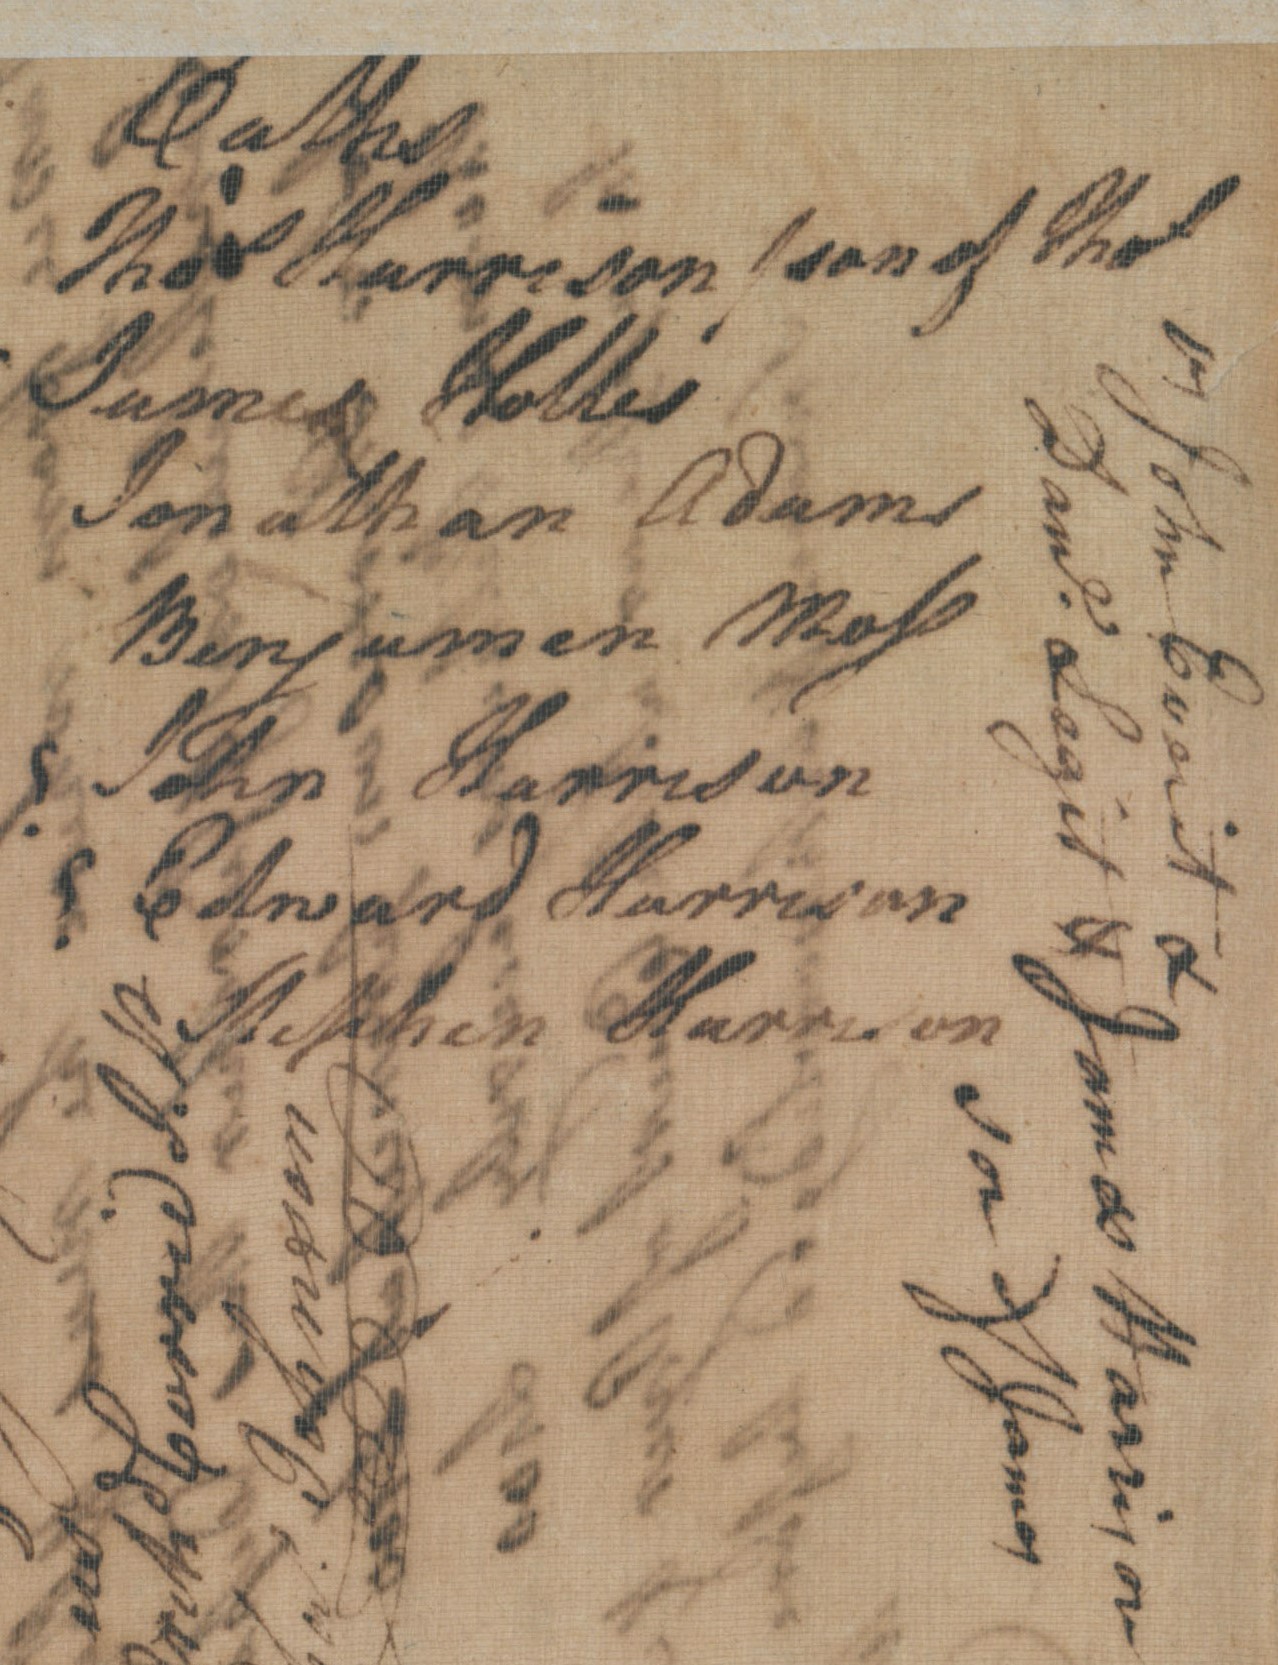 Deposition of Stephen Harrison, 17 July 1777, page 2